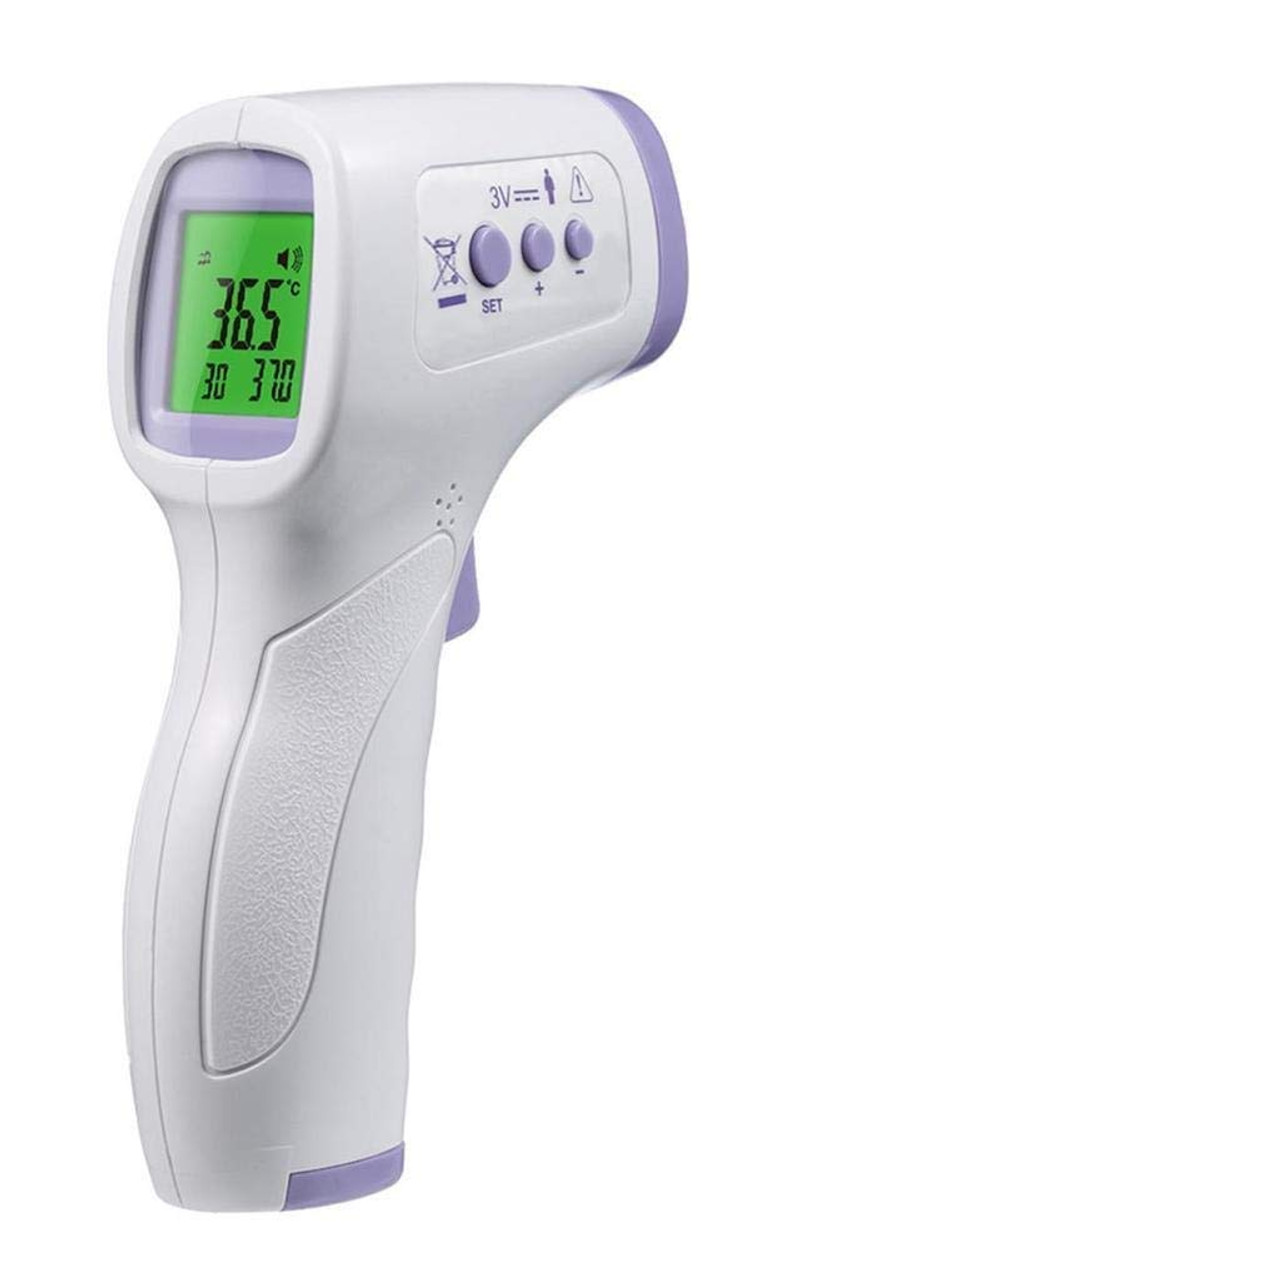 IR Infrared Digital Non-Contact Thermometer Gun w/LCD Screen for